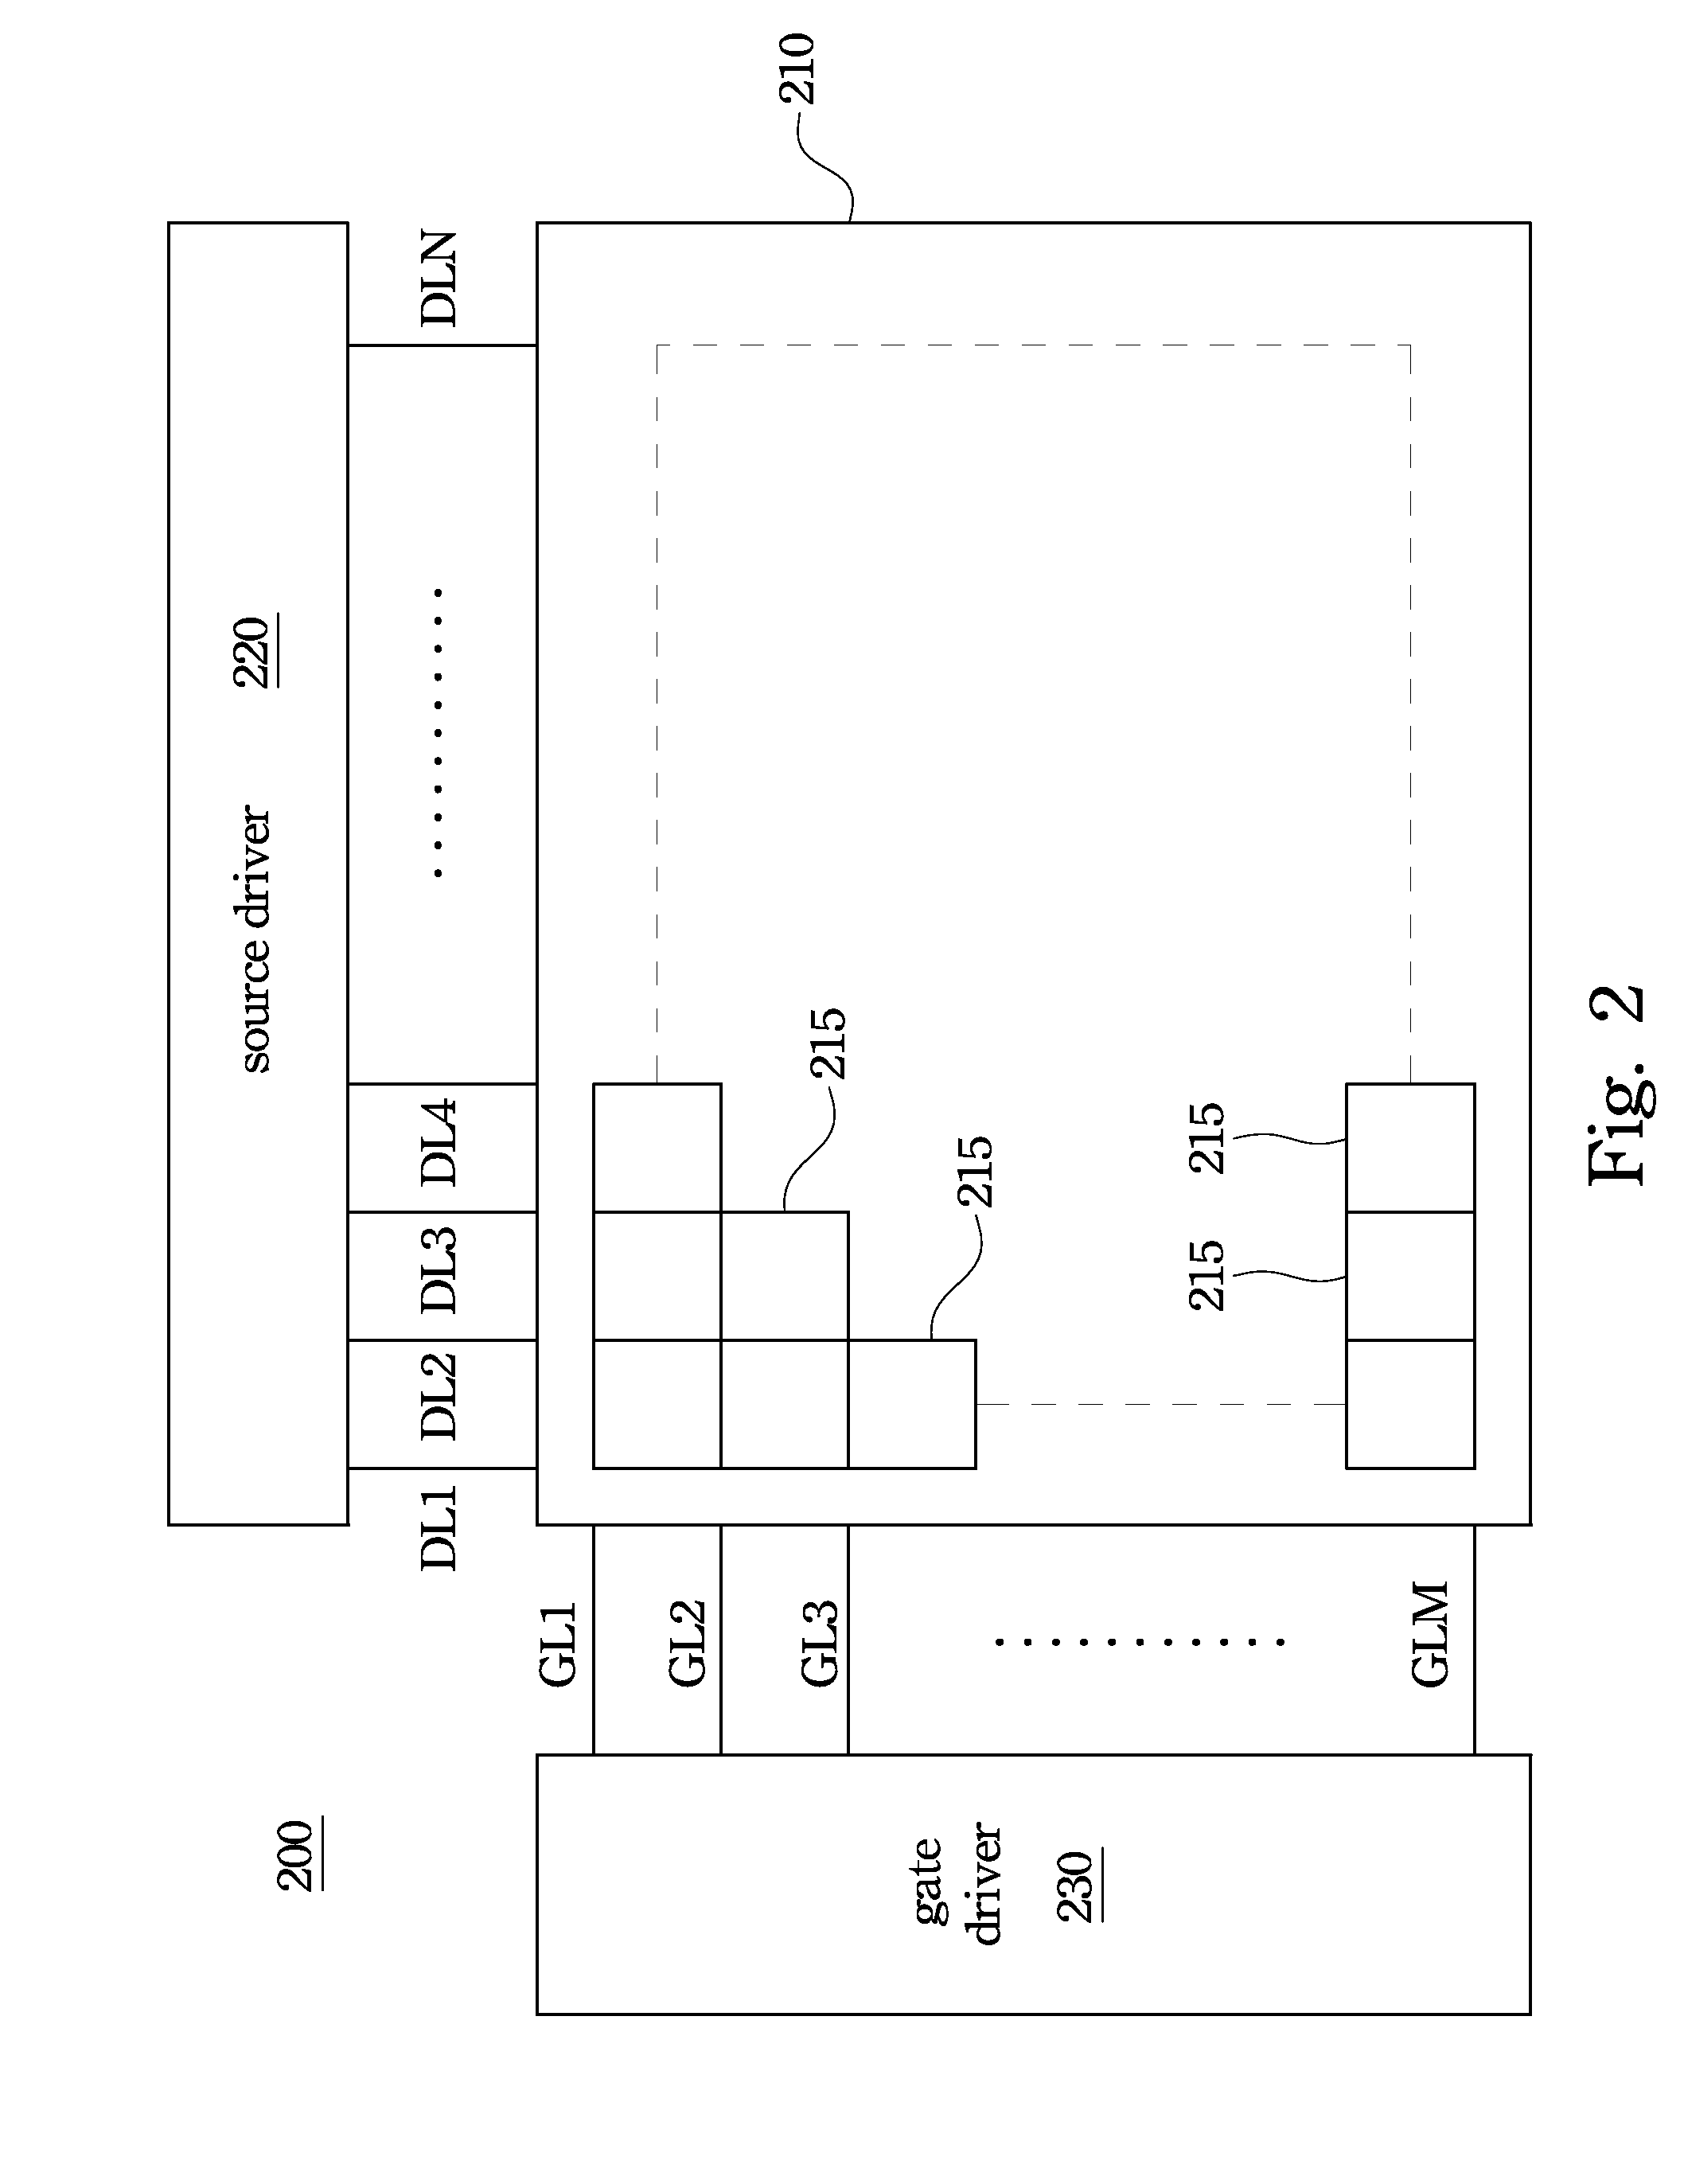 Display panel and gate driver therein